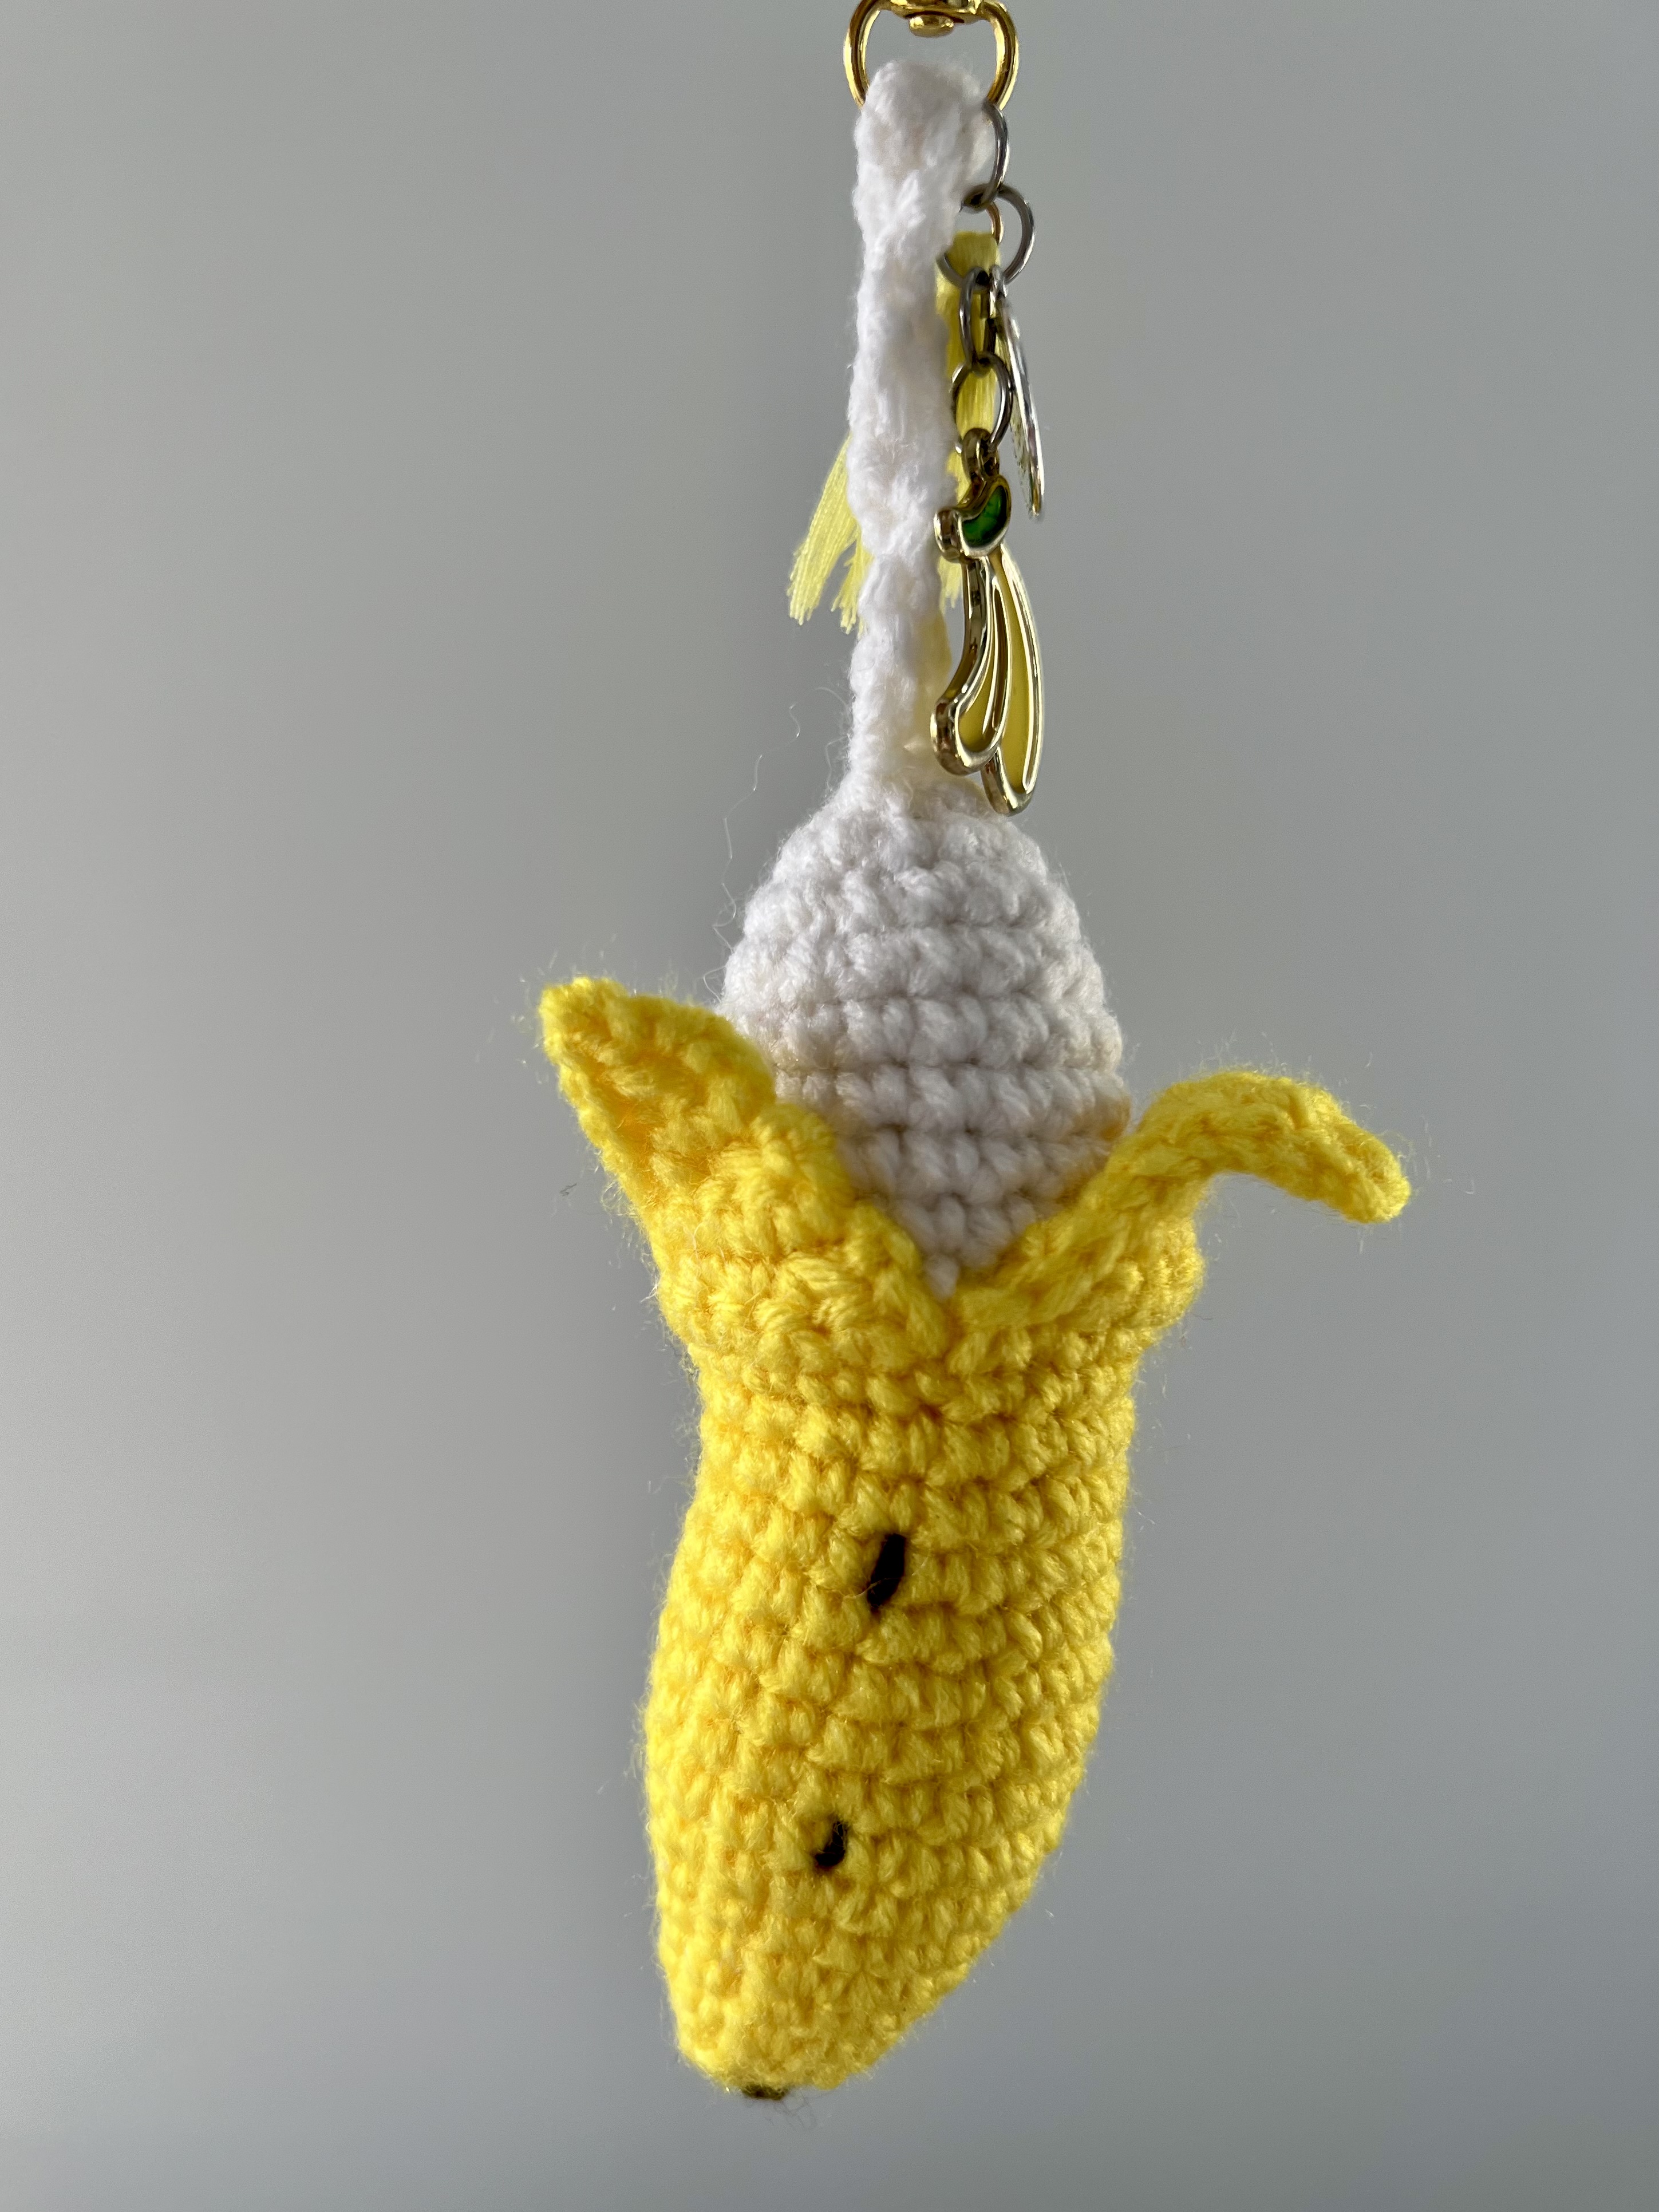 This Banana Key Ring is made with love by Classy Crafty Wife! Shop more unique gift ideas today with Spots Initiatives, the best way to support creators.